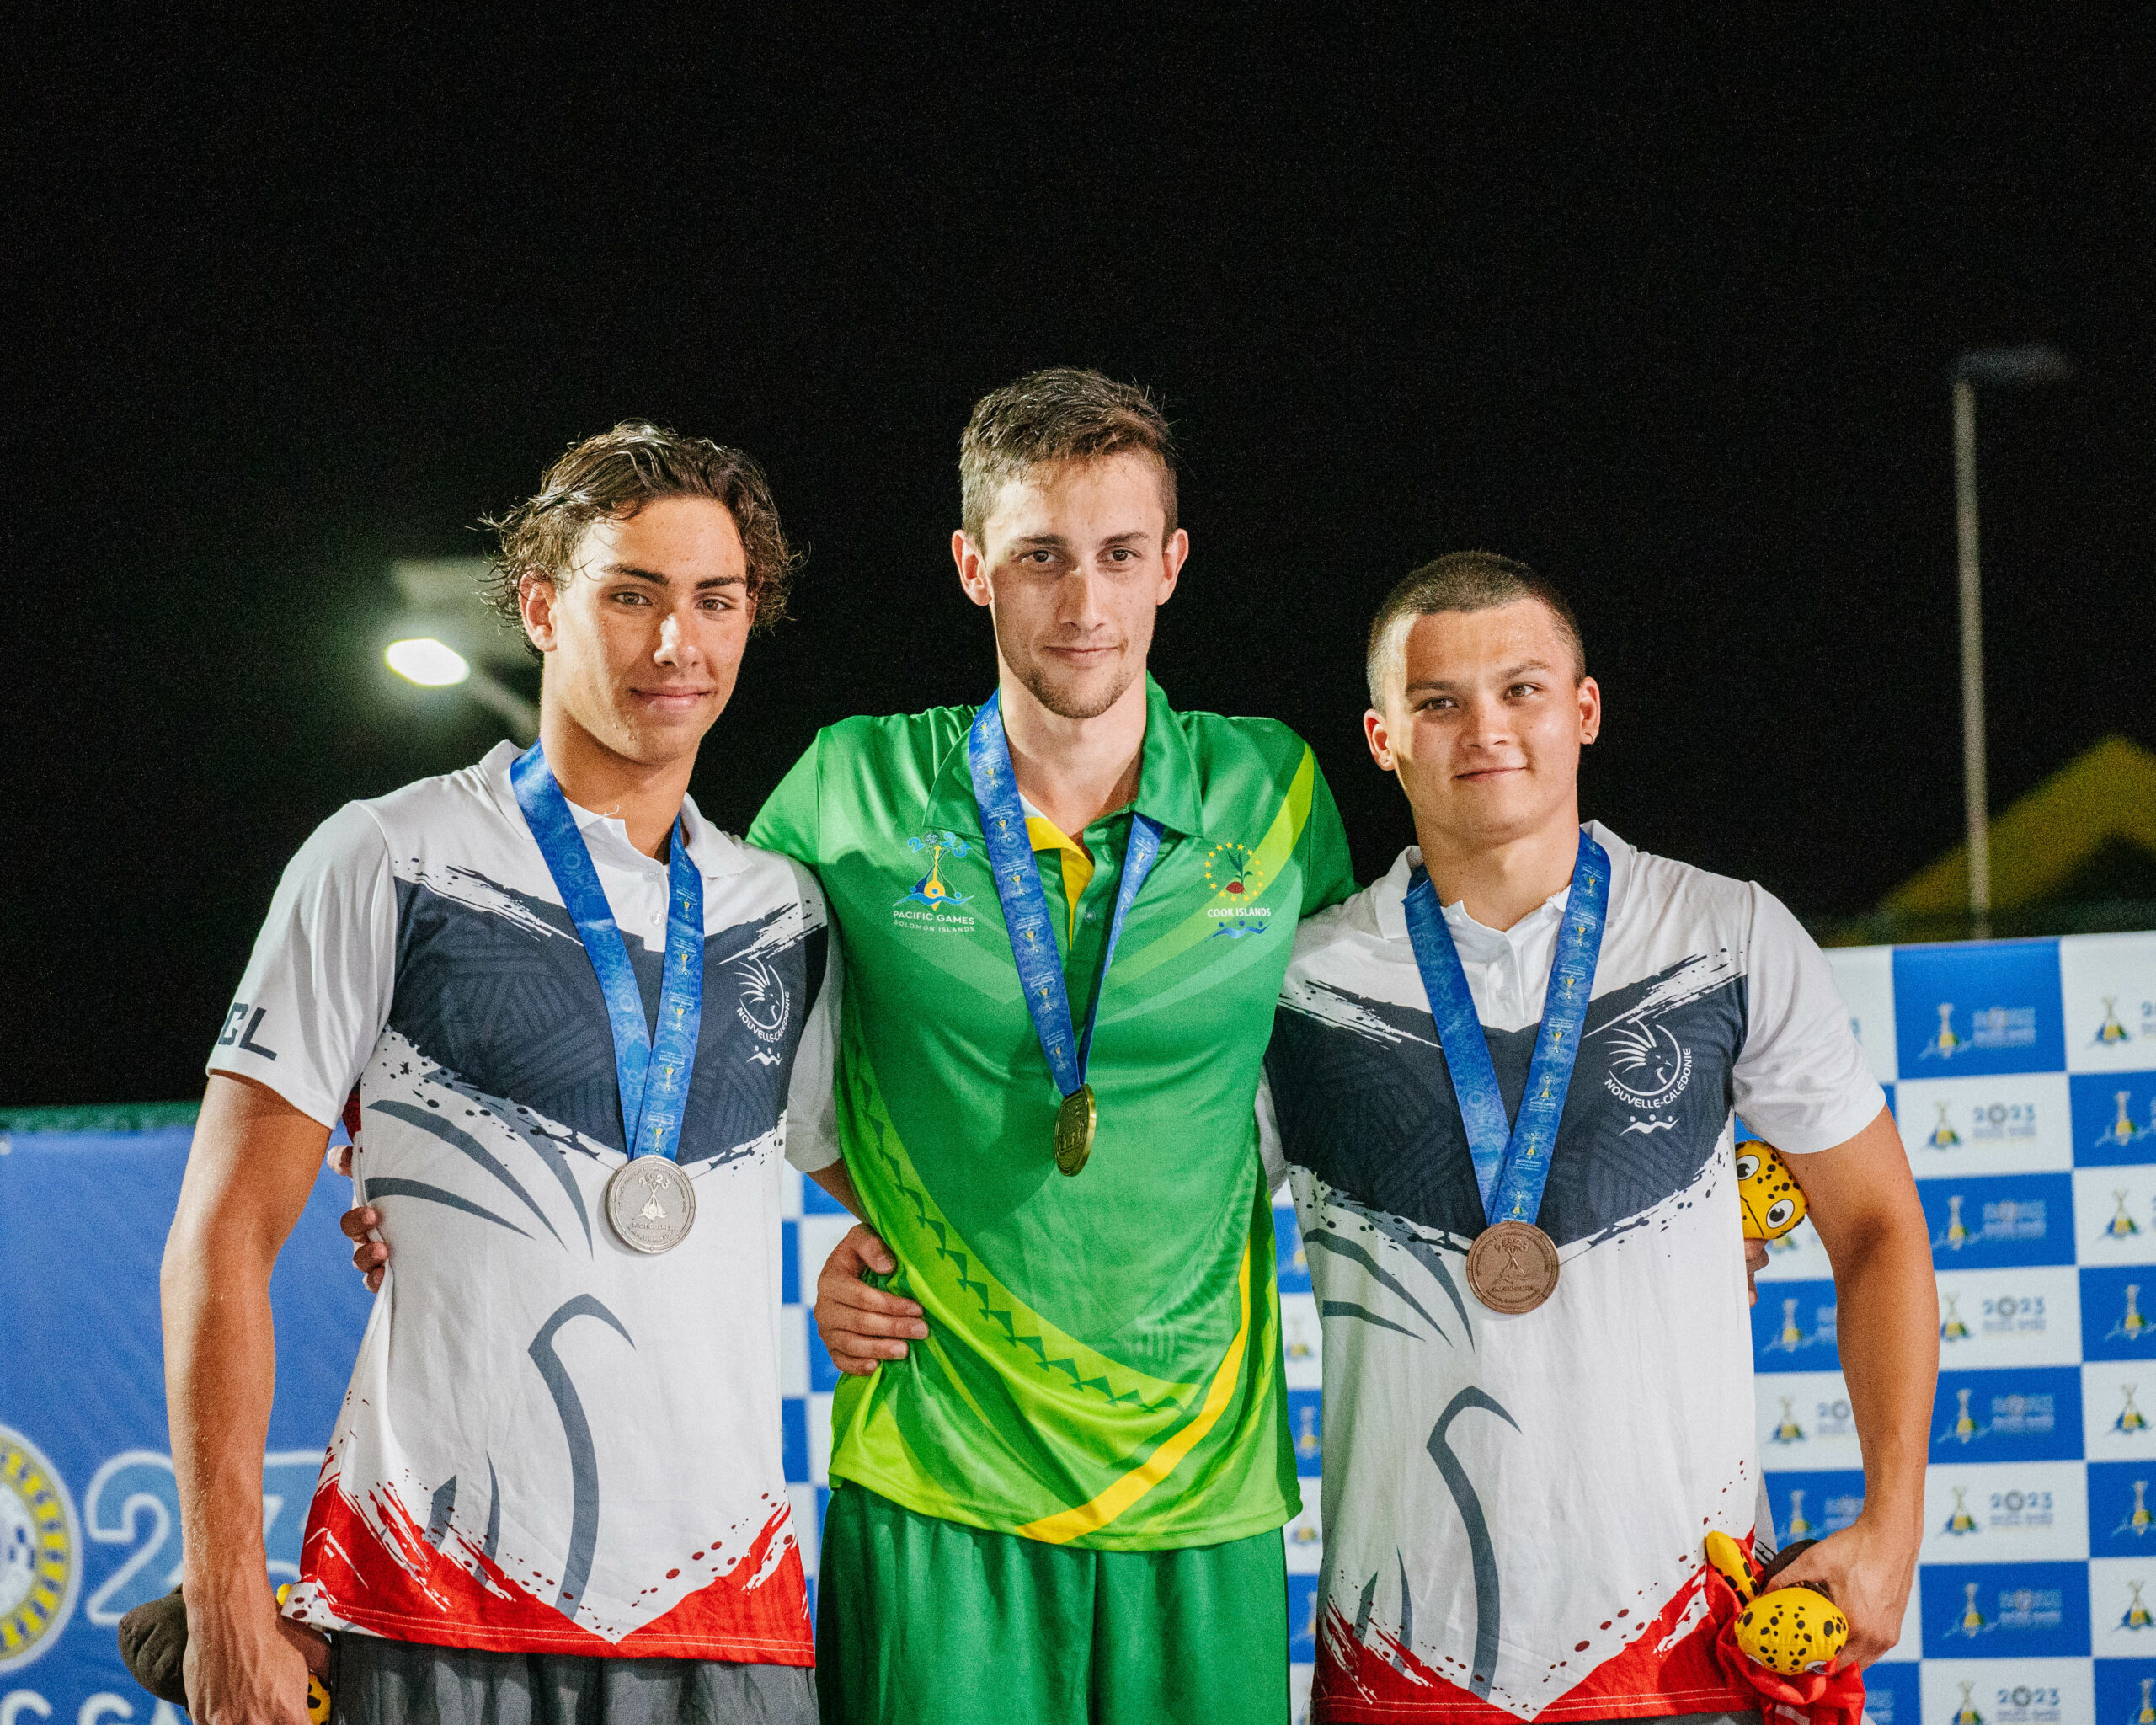 Three male swimmers on a medal podium